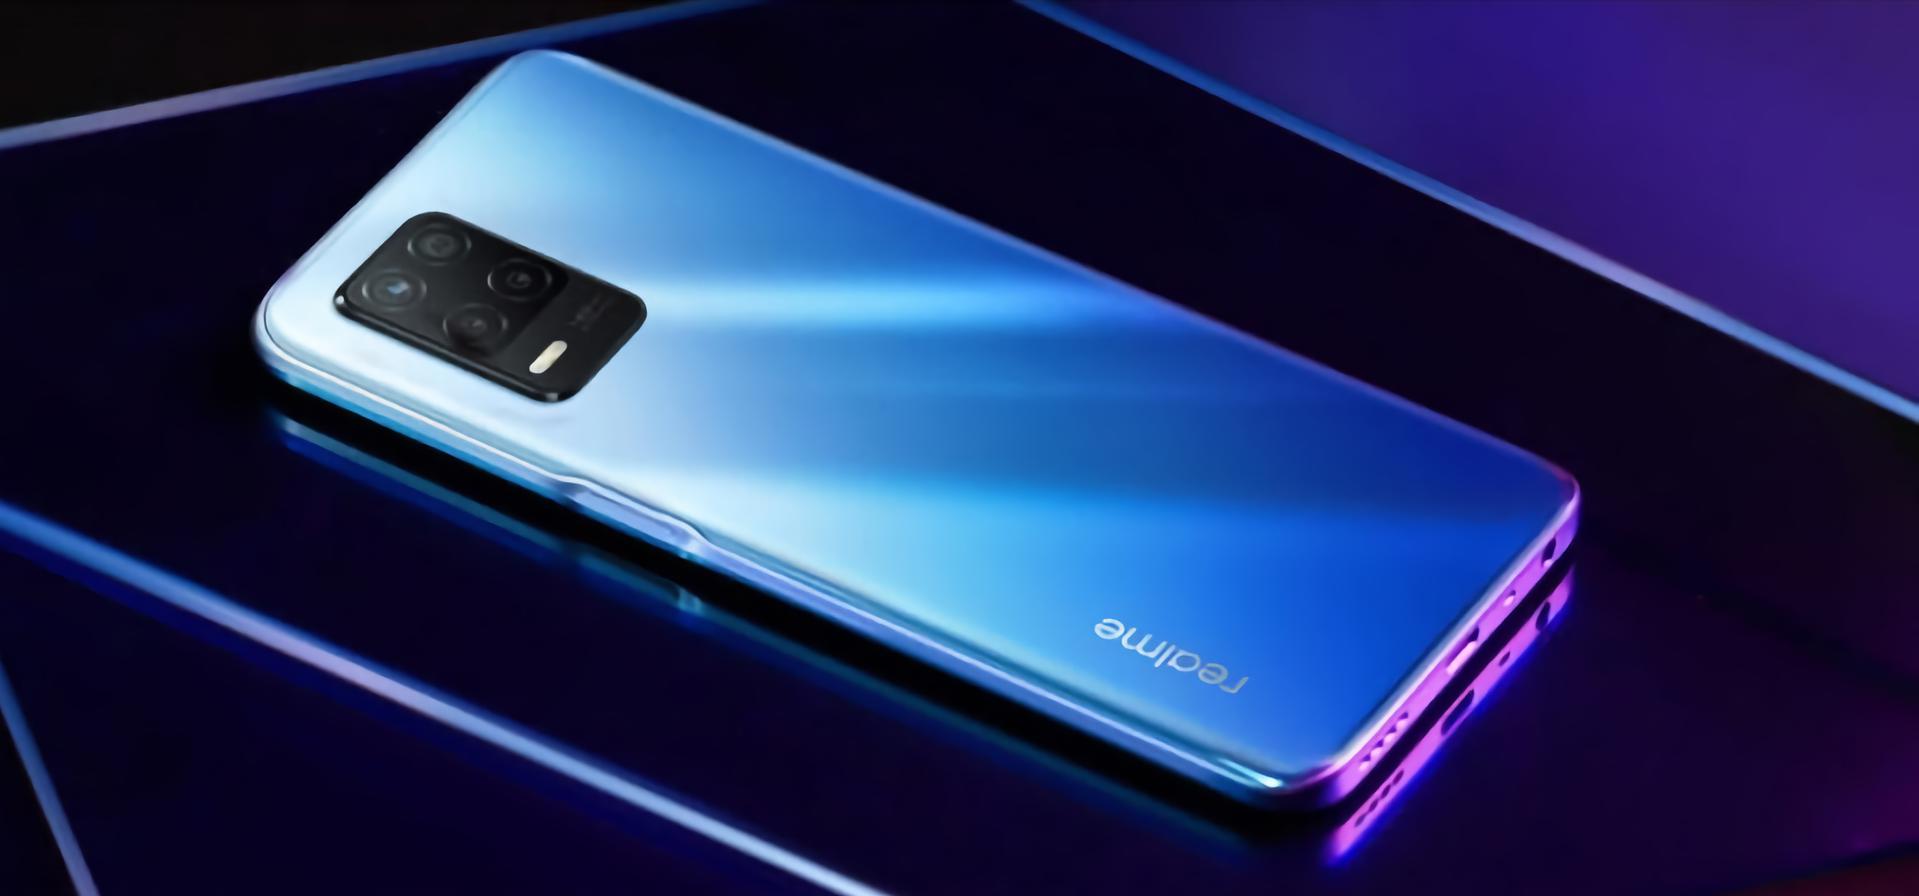 90Hz screen, Dimensity 810 chip, 48MP triple camera and Android 12 out of the box: realme 9 5G specs leak online